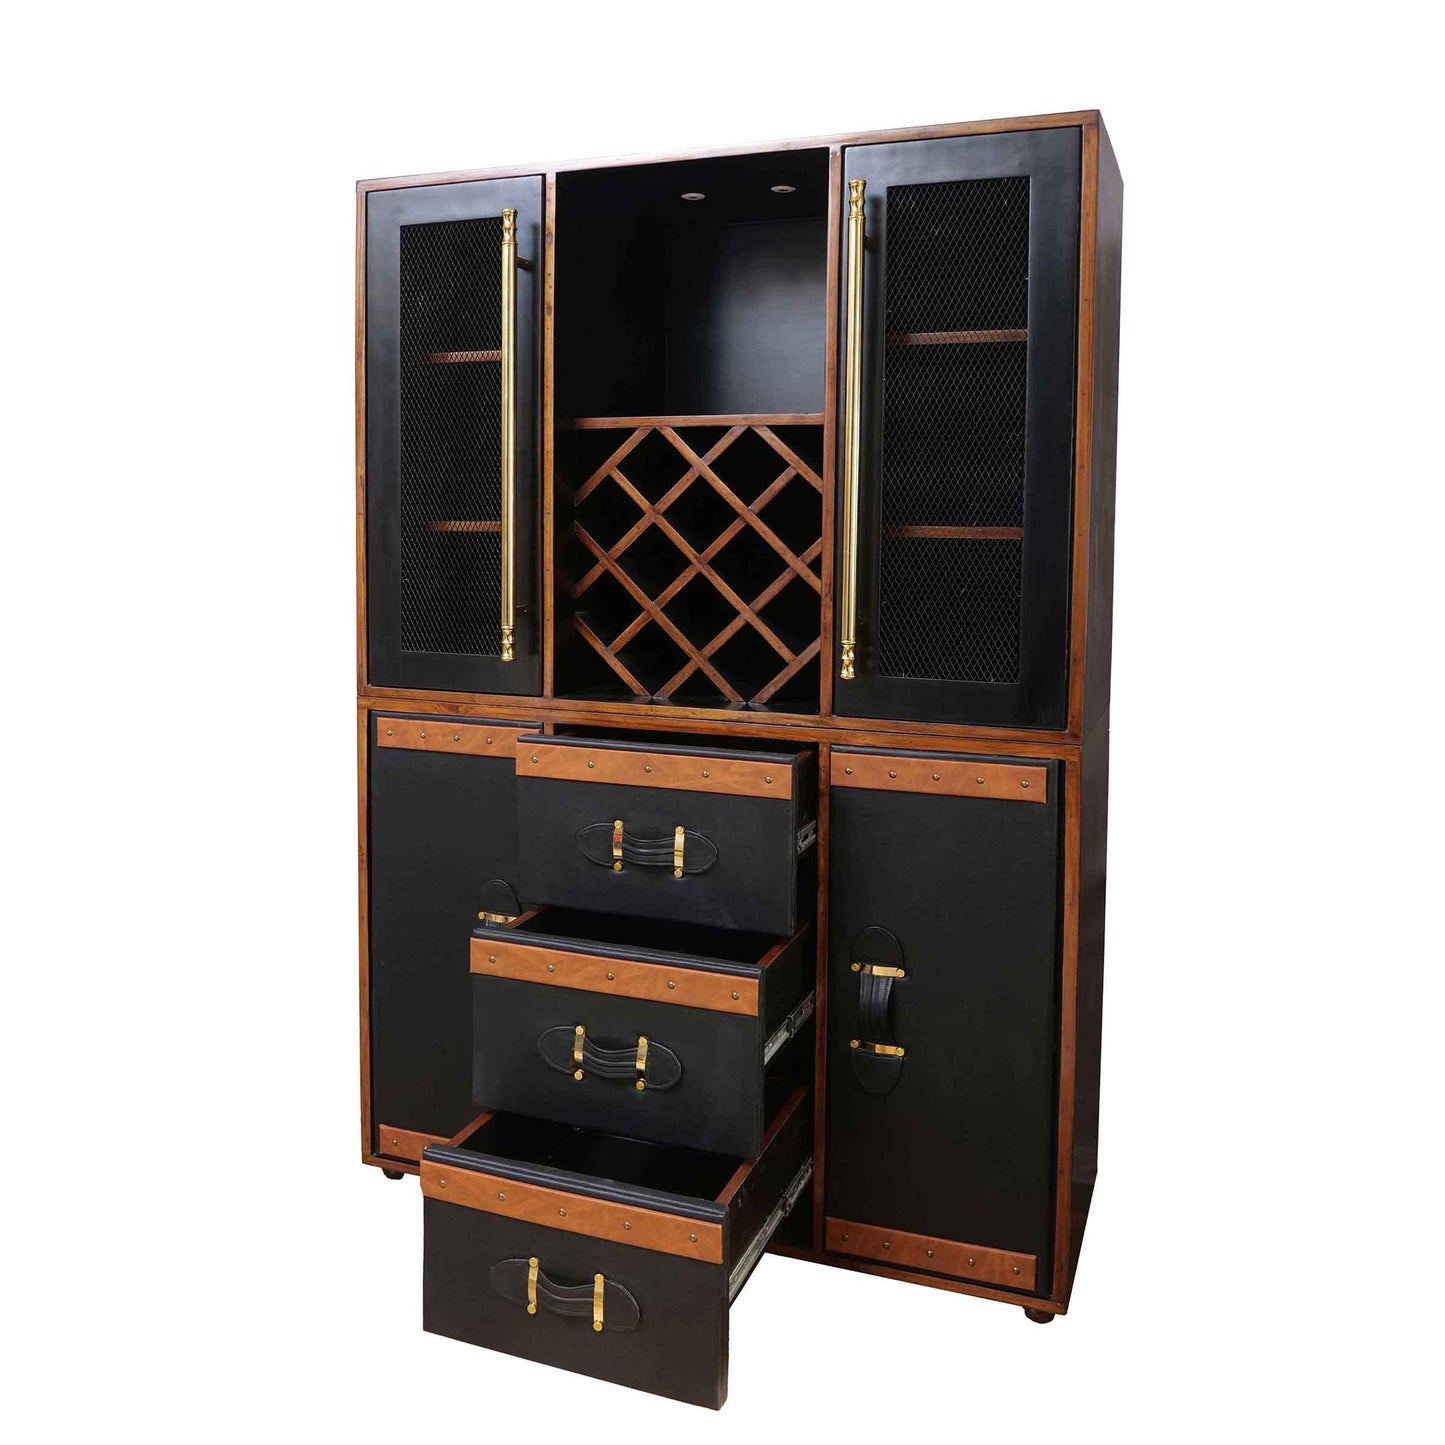 Marmont Leather Bar Furniture - Happyware Home Pvt Ltd